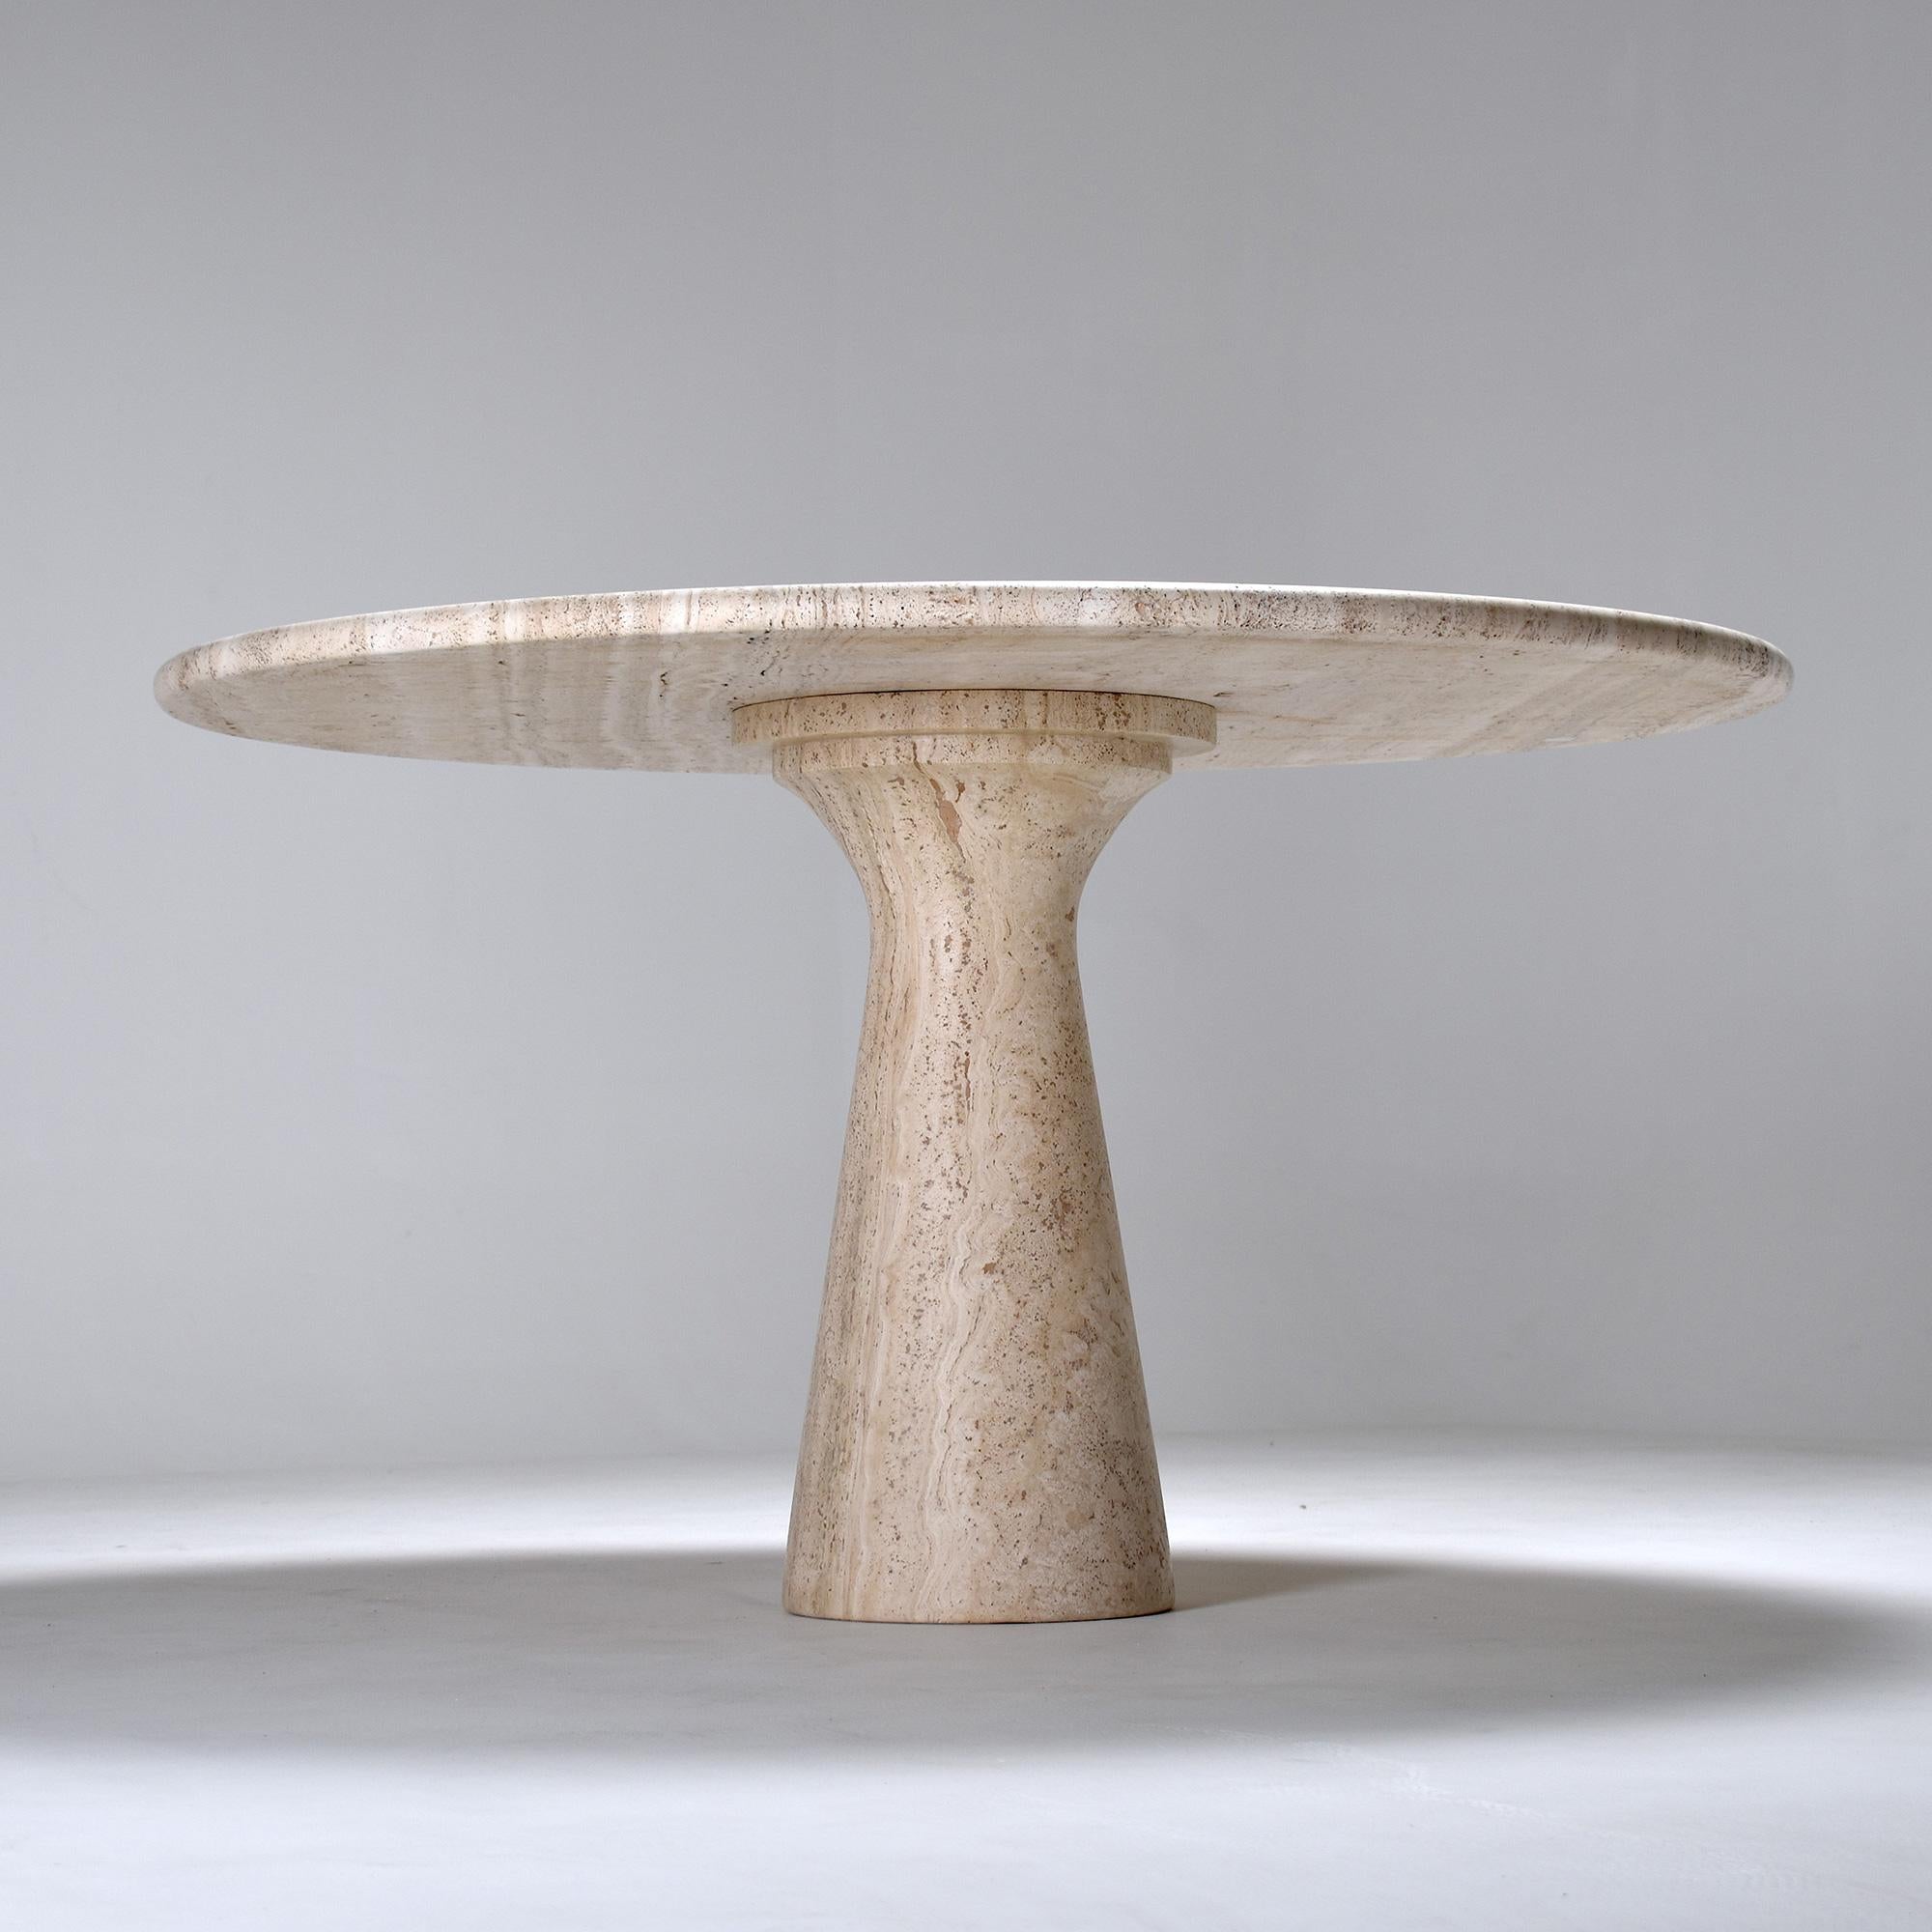 Elegant round dining table in travertine.
The top, presenting a nice grain, rests on a gently curved foot.
The condition is pristine, the top has just been professionally repolished.
In all, we have a sensation of lightness, although the st is